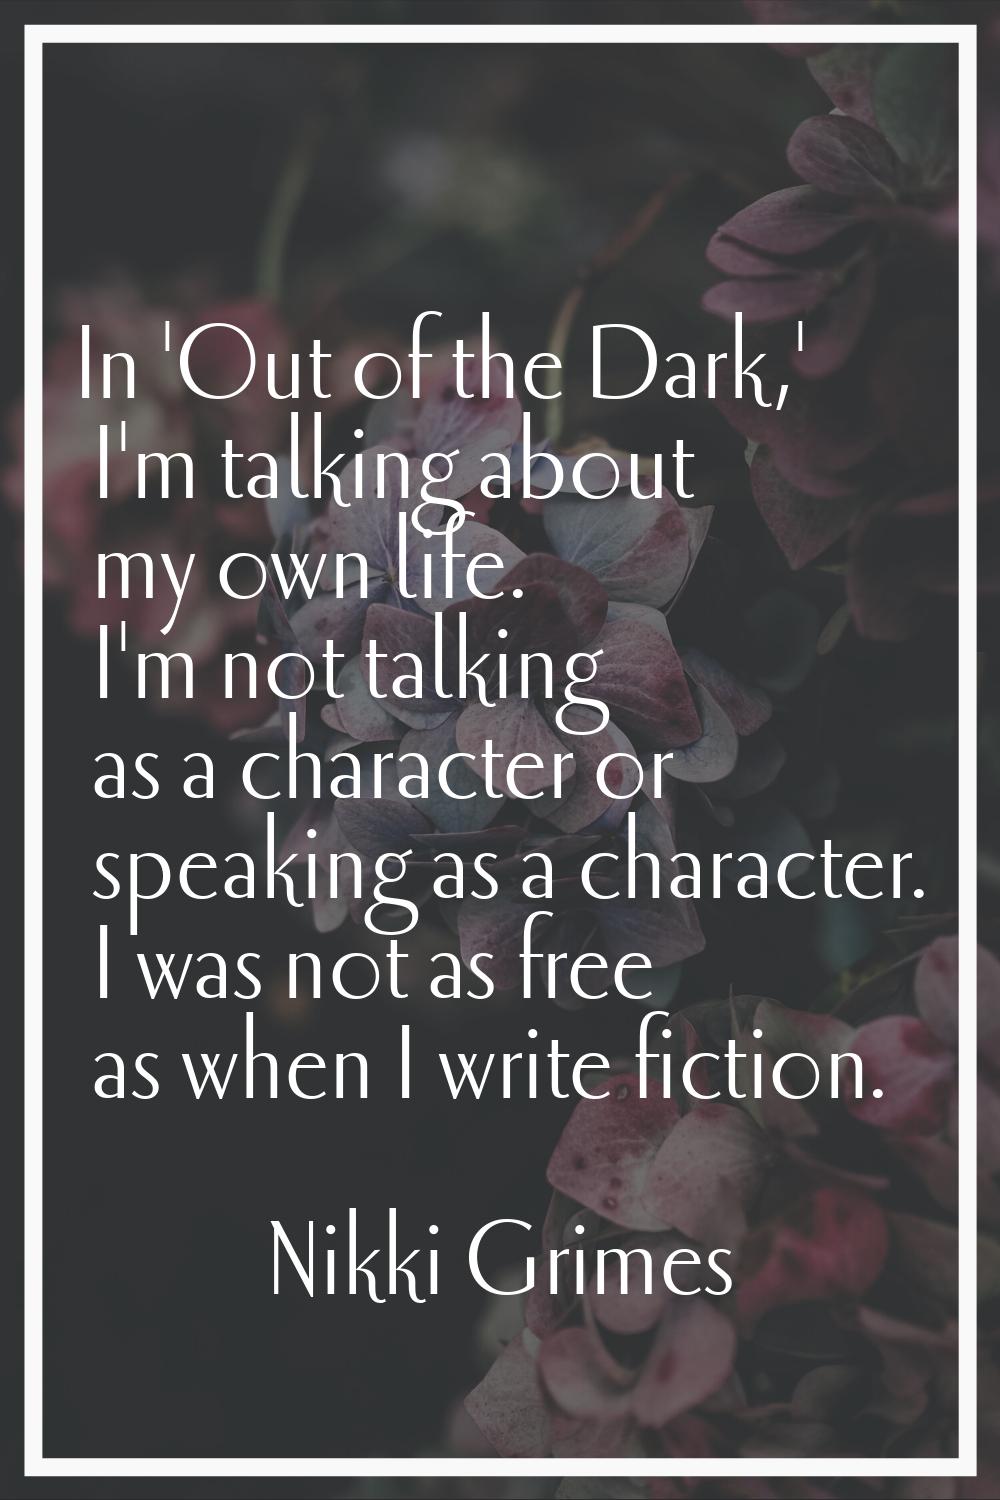 In 'Out of the Dark,' I'm talking about my own life. I'm not talking as a character or speaking as 